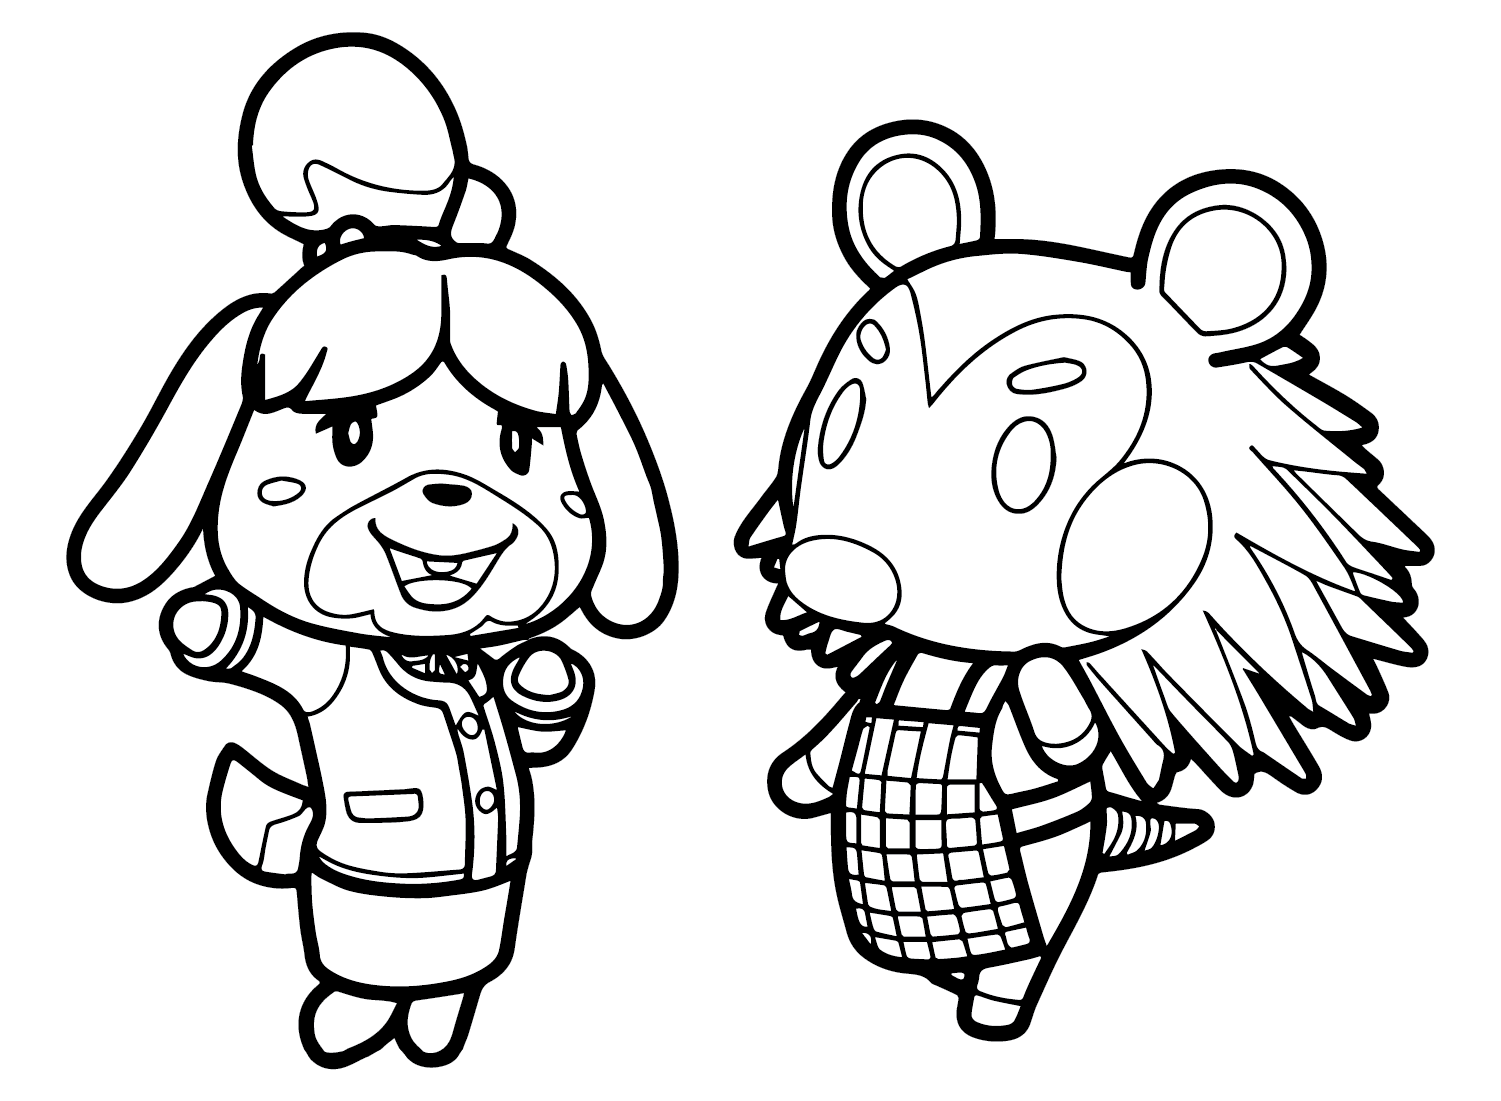 Labelle And Isabelle from Animal Crossing